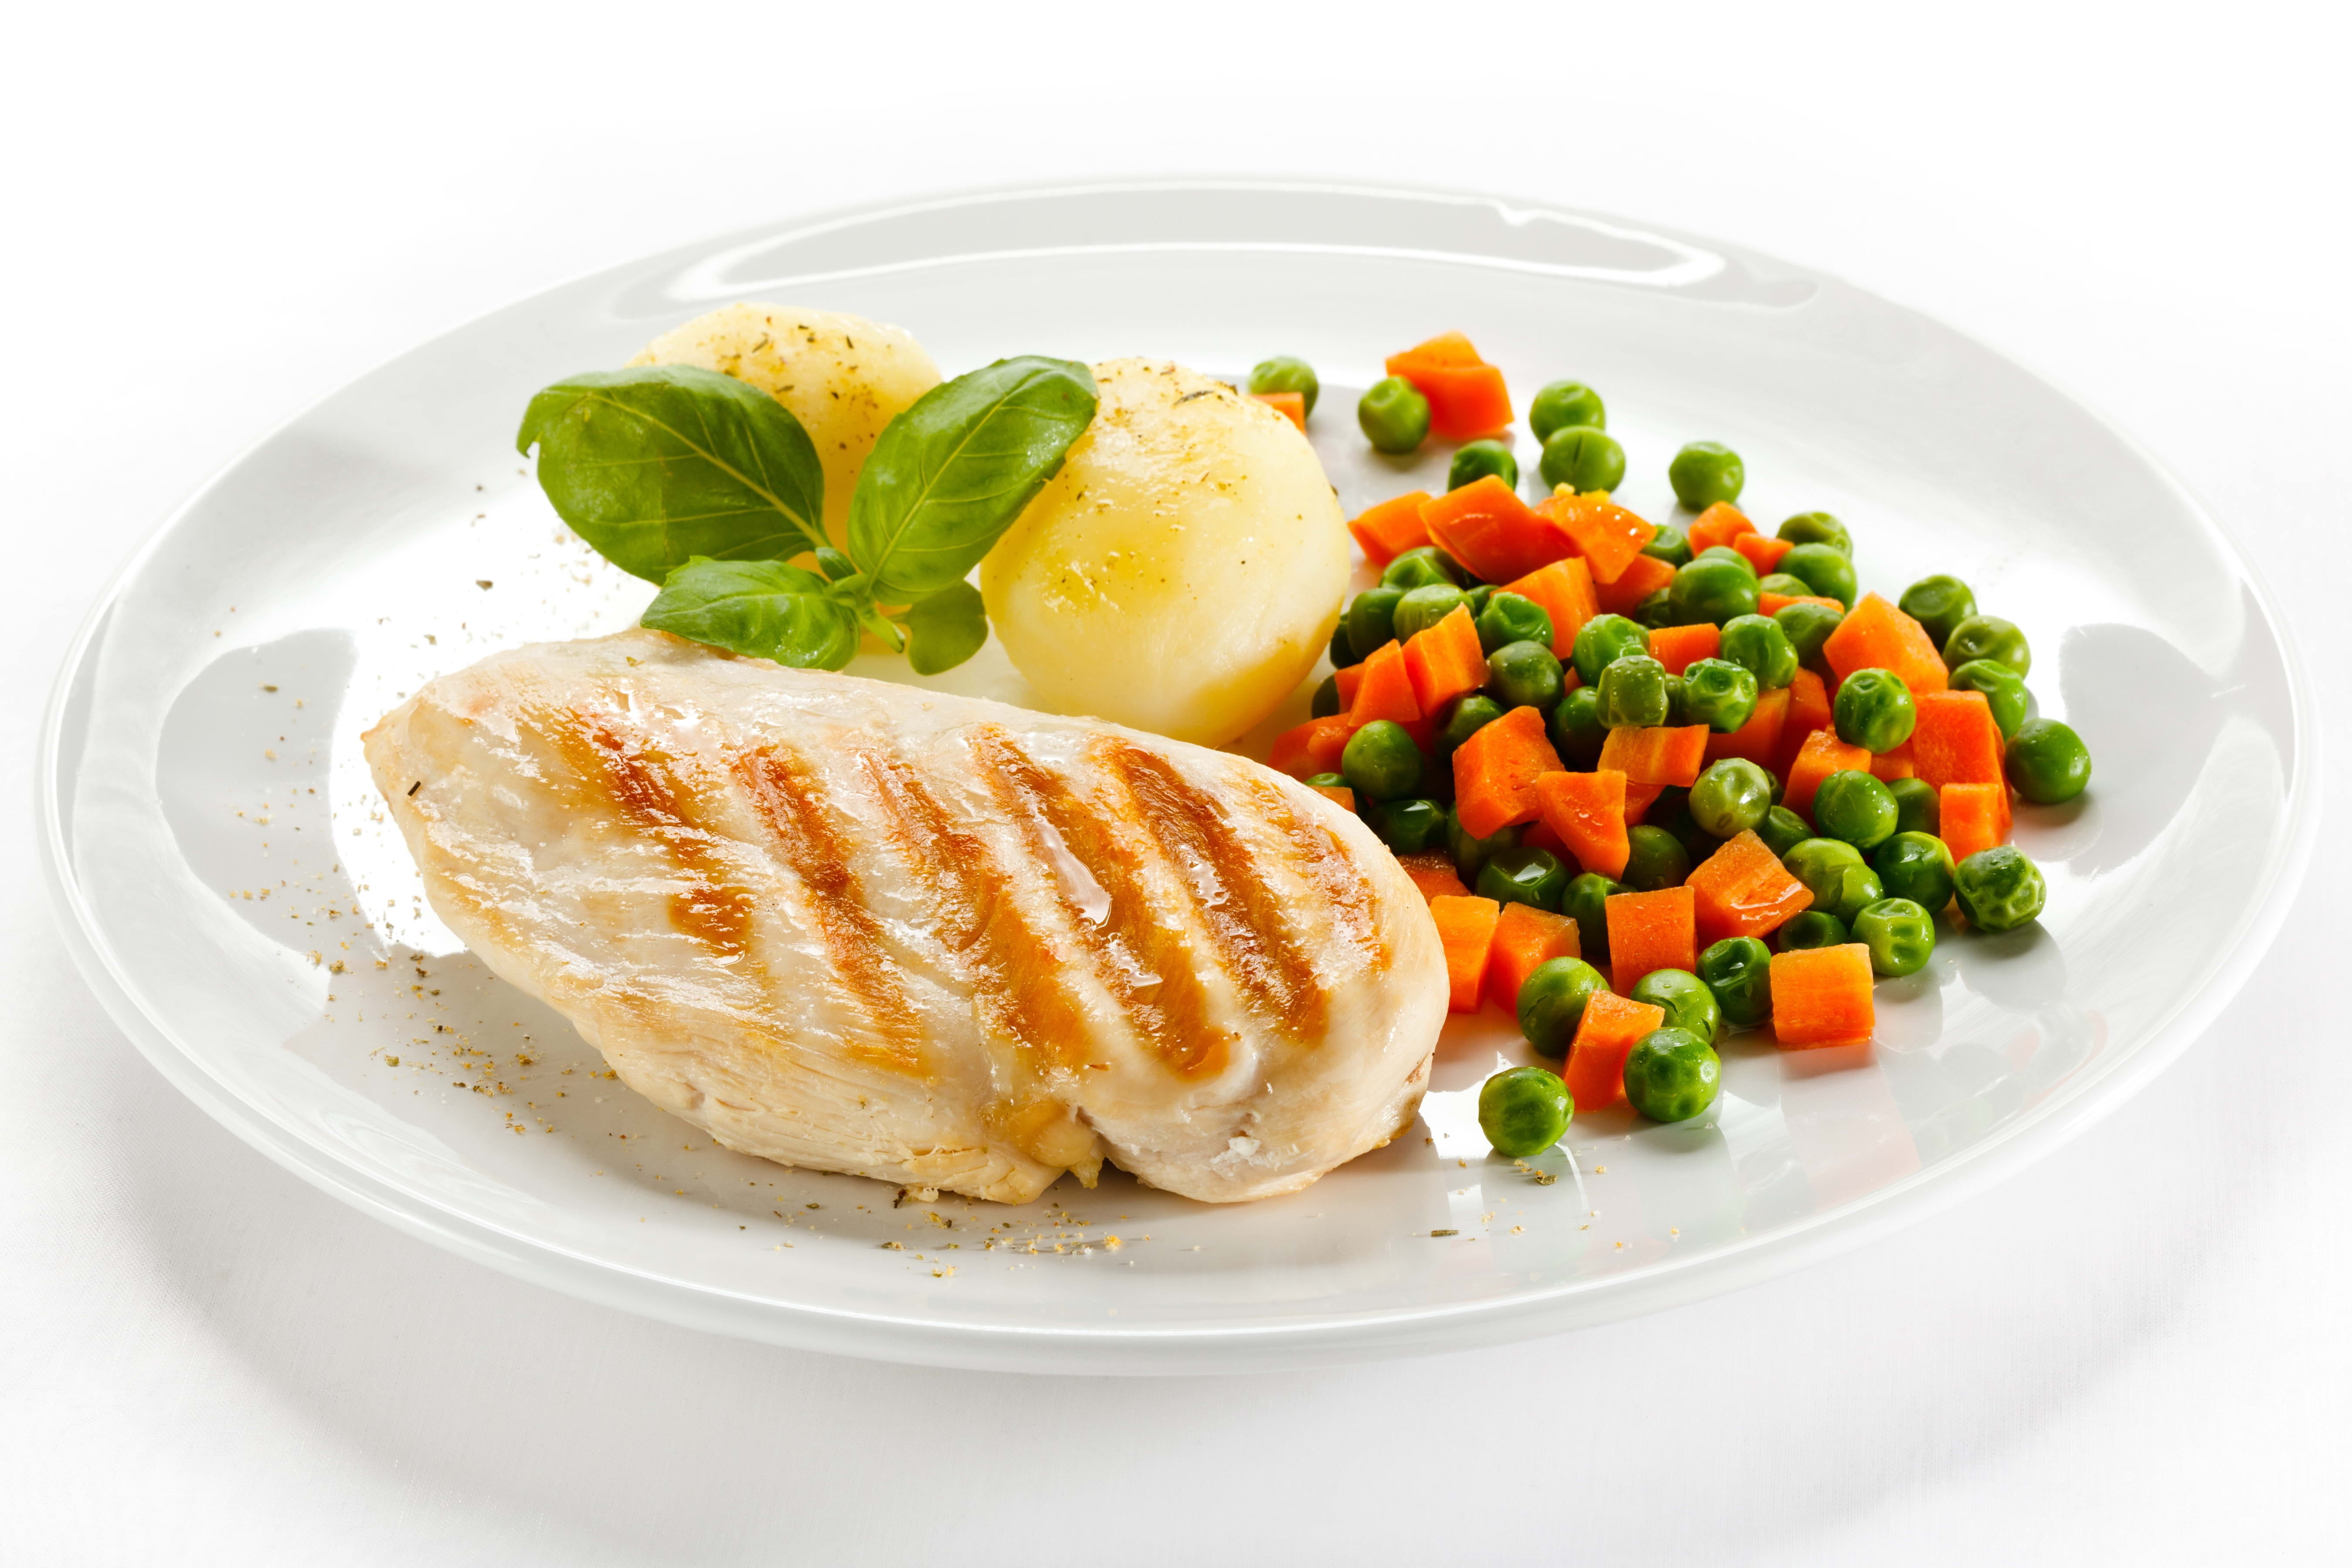 Grilled Chicken Breast With Steam Carrot And Peas Hd - Chicken Breast Freestock , HD Wallpaper & Backgrounds